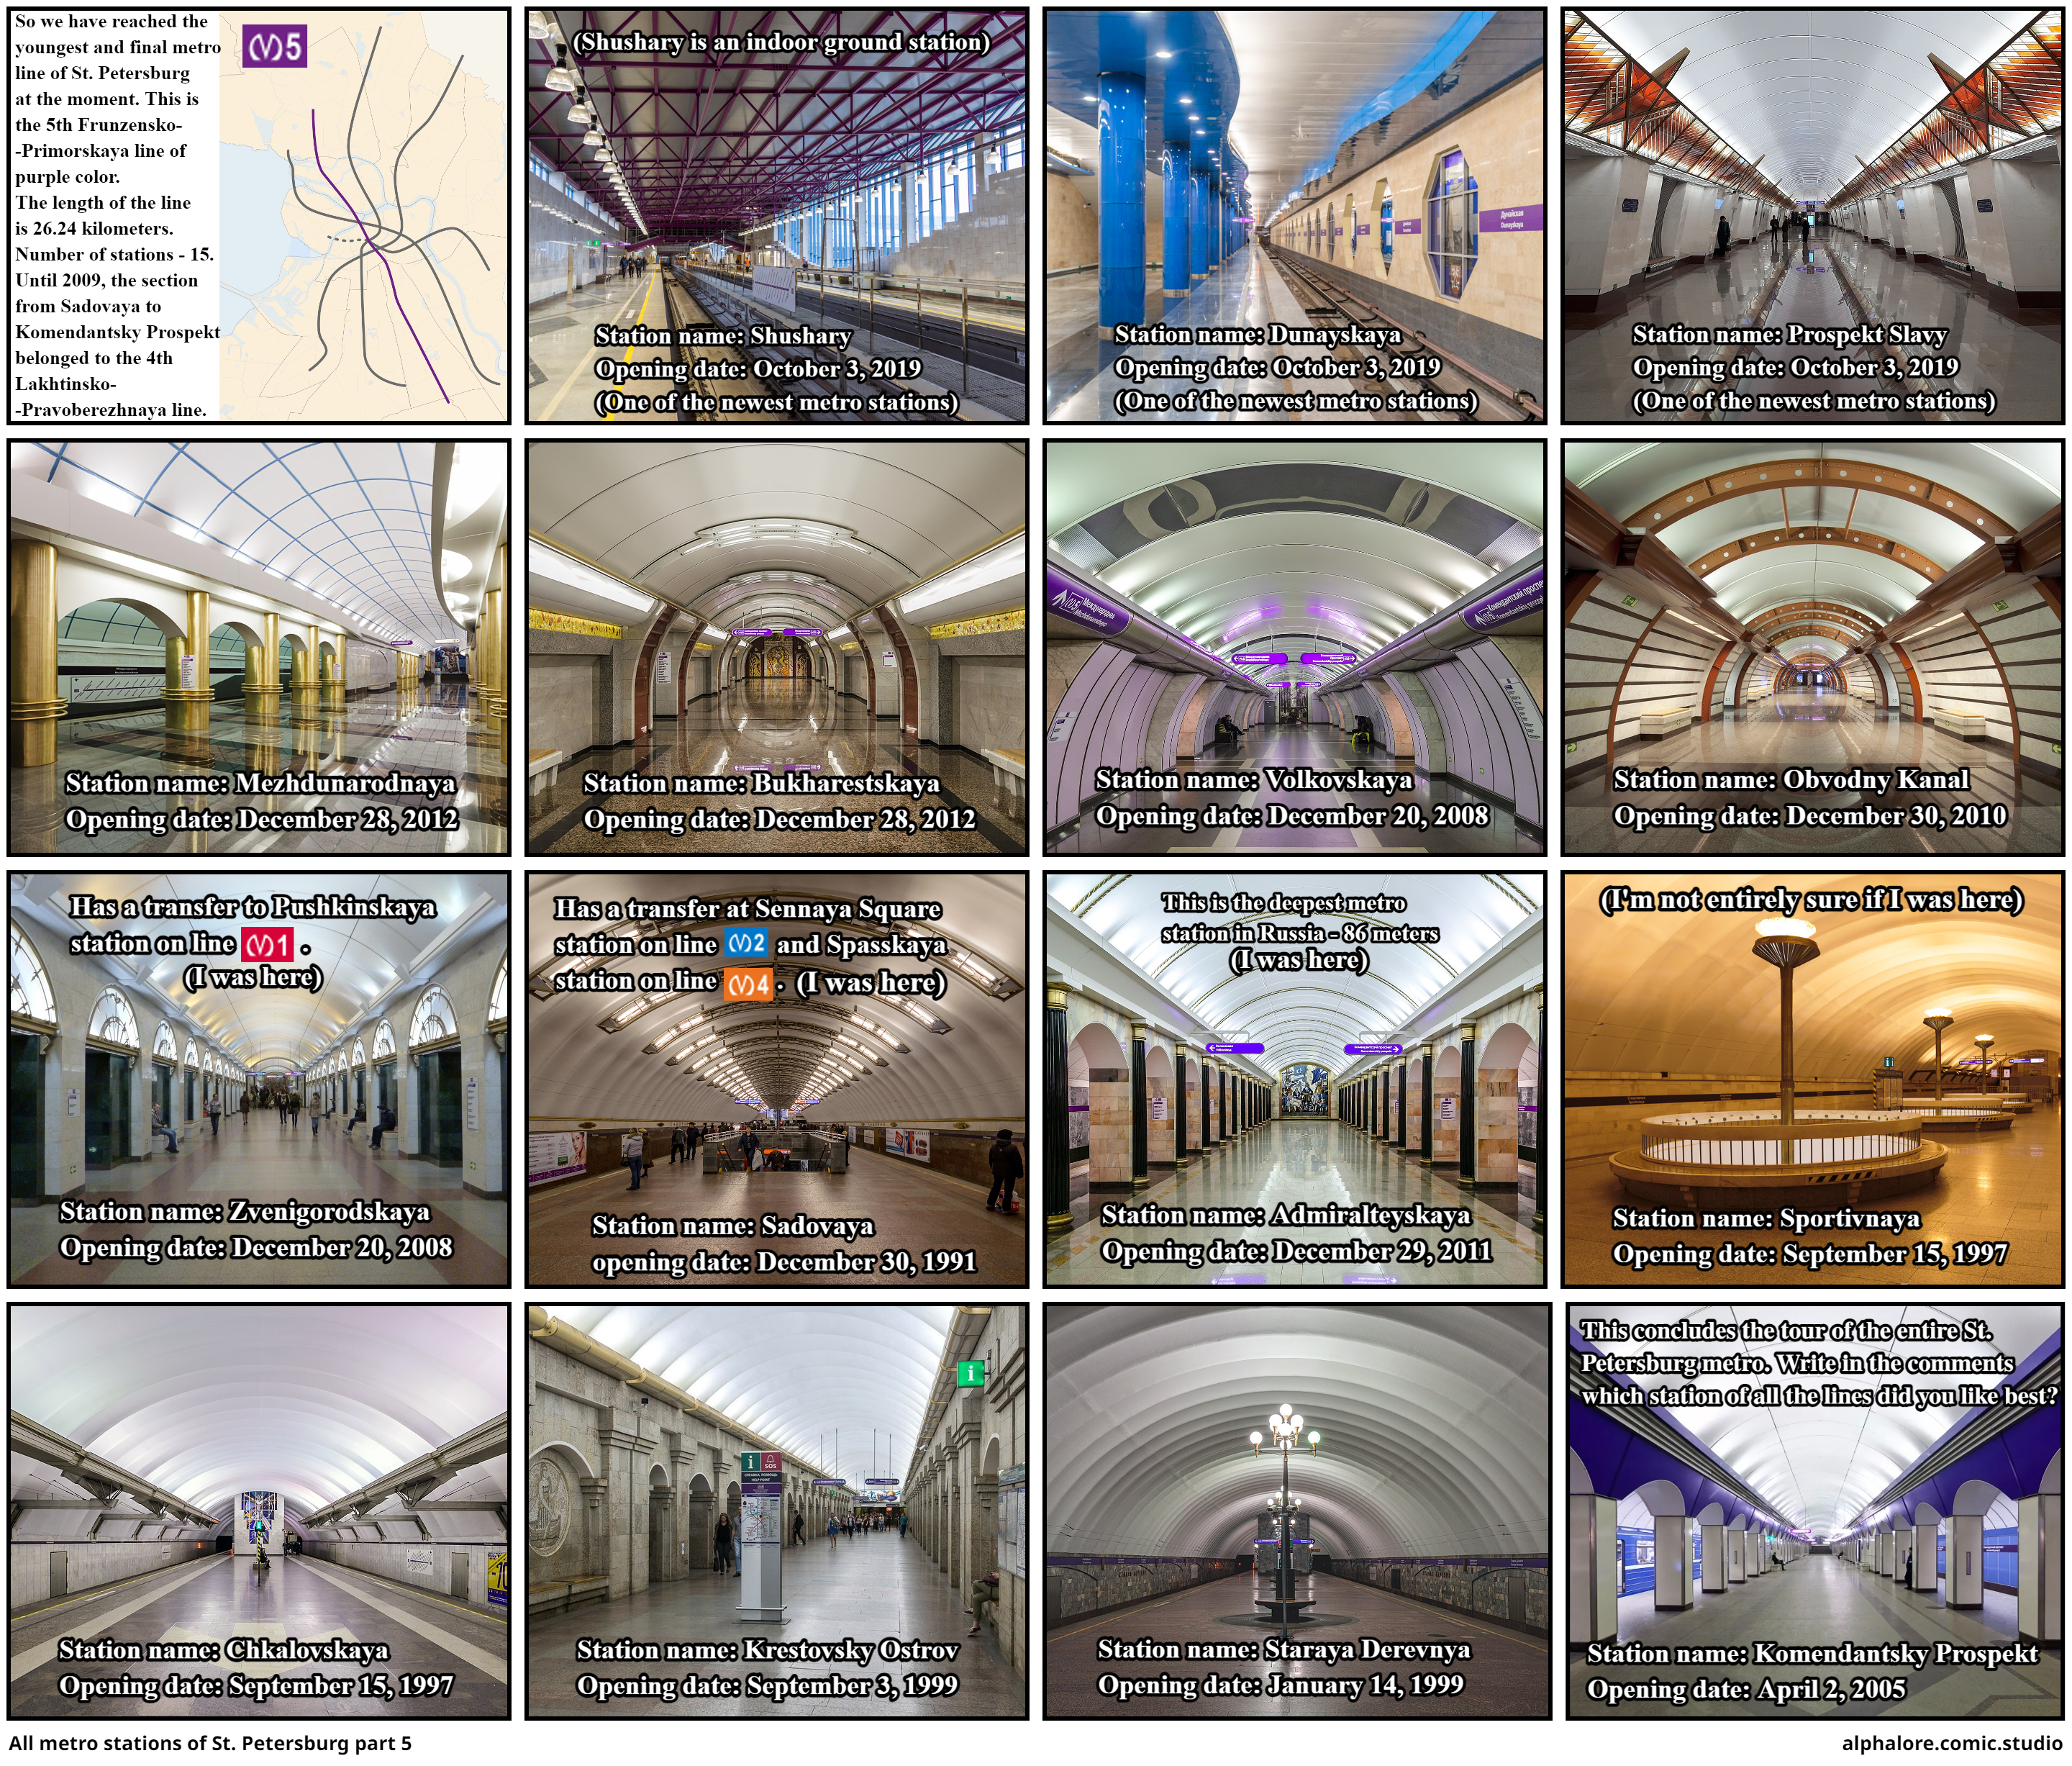 All metro stations of St. Petersburg part 5